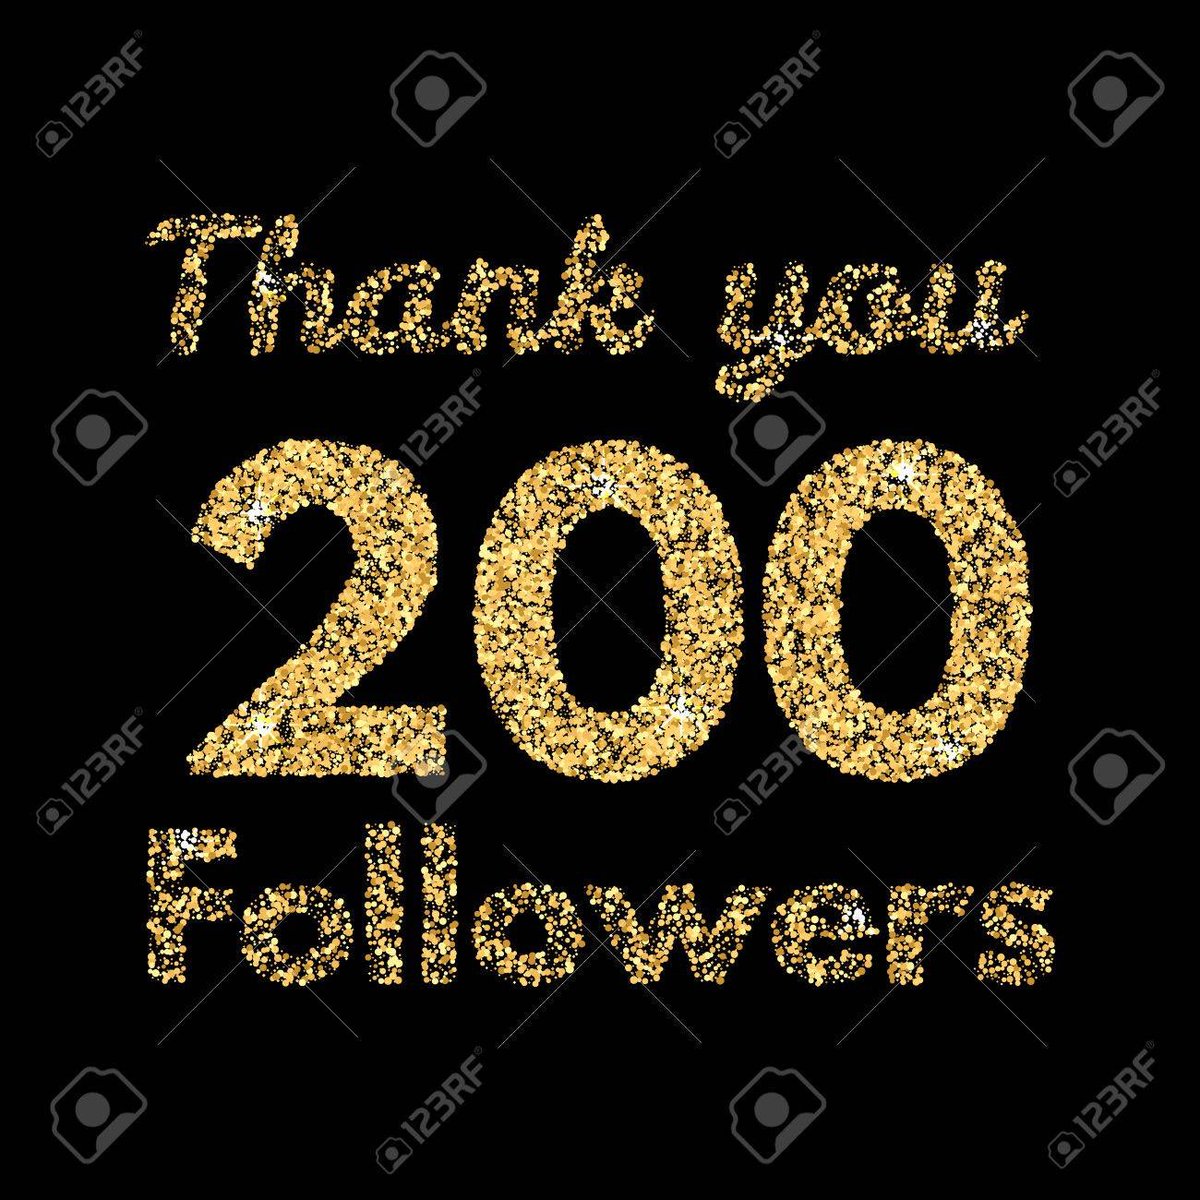 Thank you for sharing! We now have 200 followers! Let’s see if we can get to 300 soon! Keep following to hear news of all things happening at the club. You are supporting local and keeping the club alive! Thank you 😊